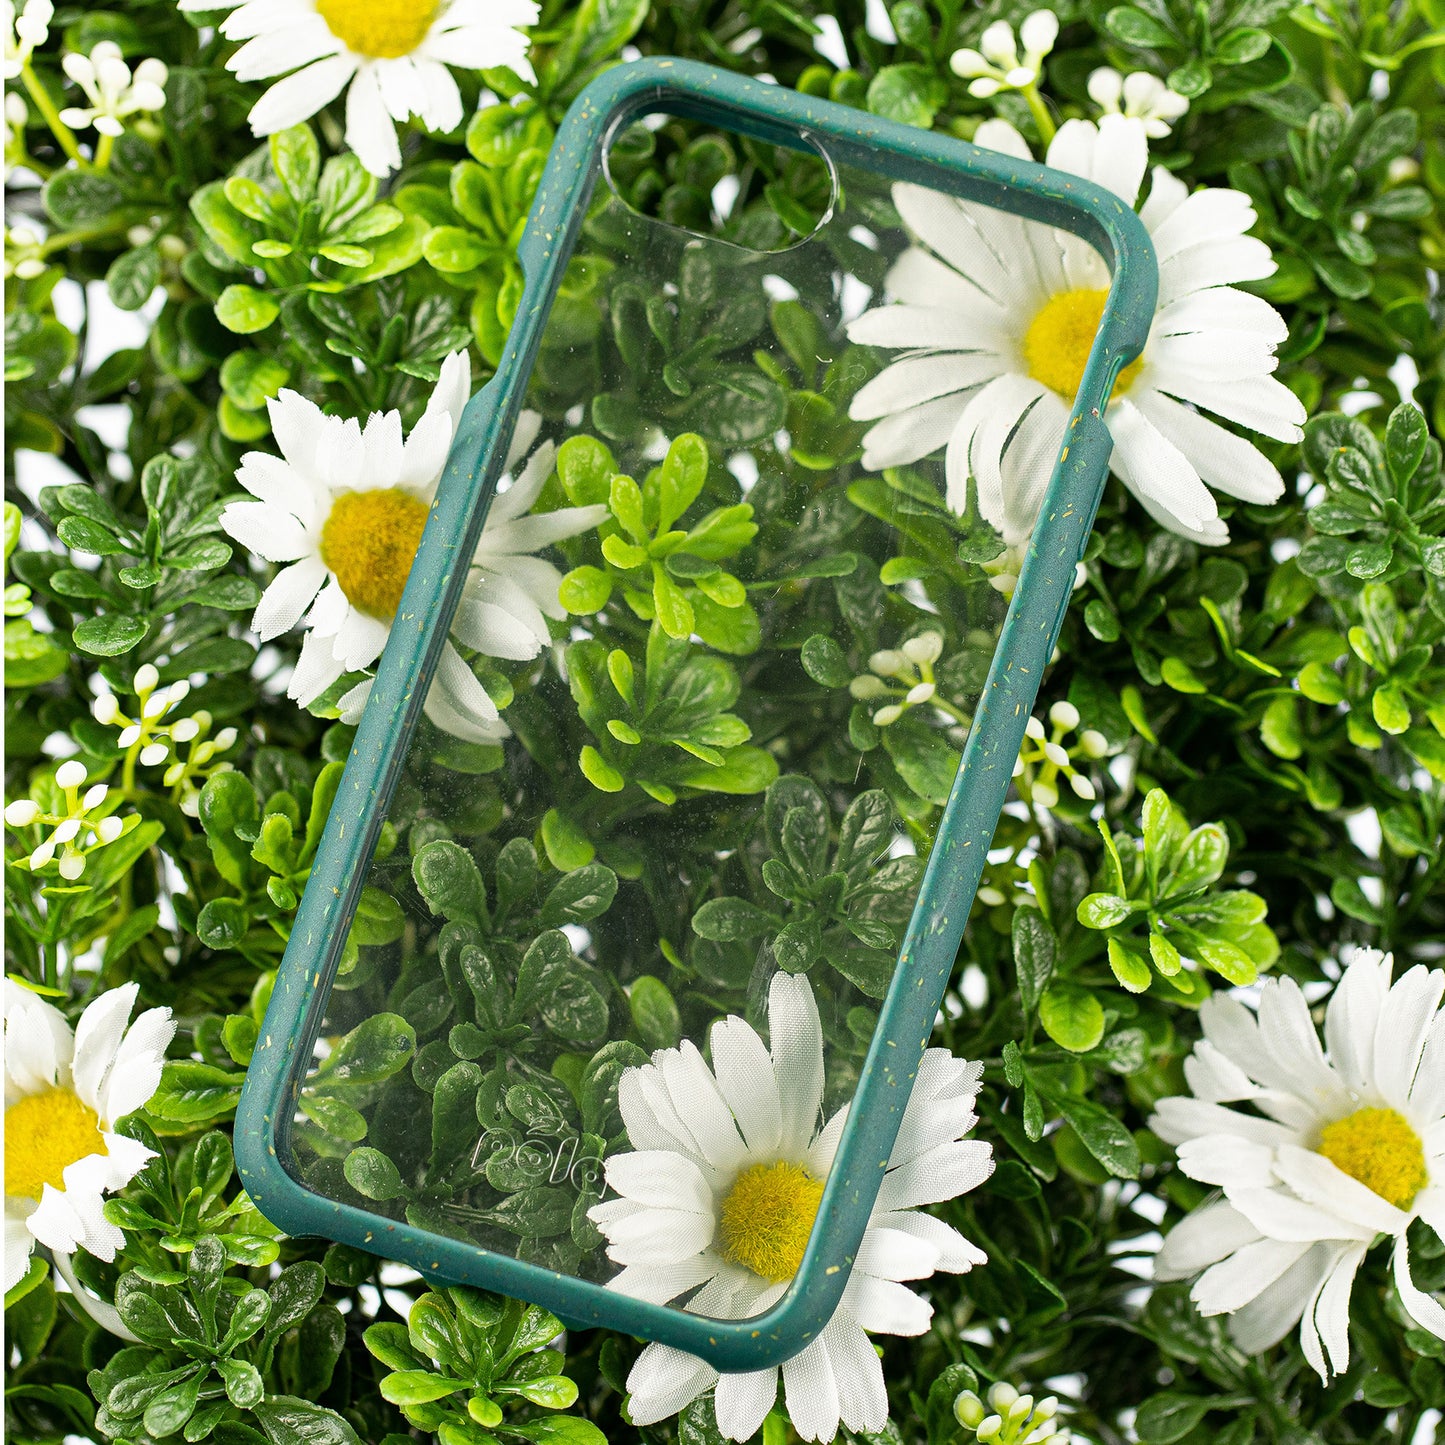 iPhone SE (2022/2020)/8 Pela Clear/Green Compostable Eco-Friendly Protective Case - 15-07404